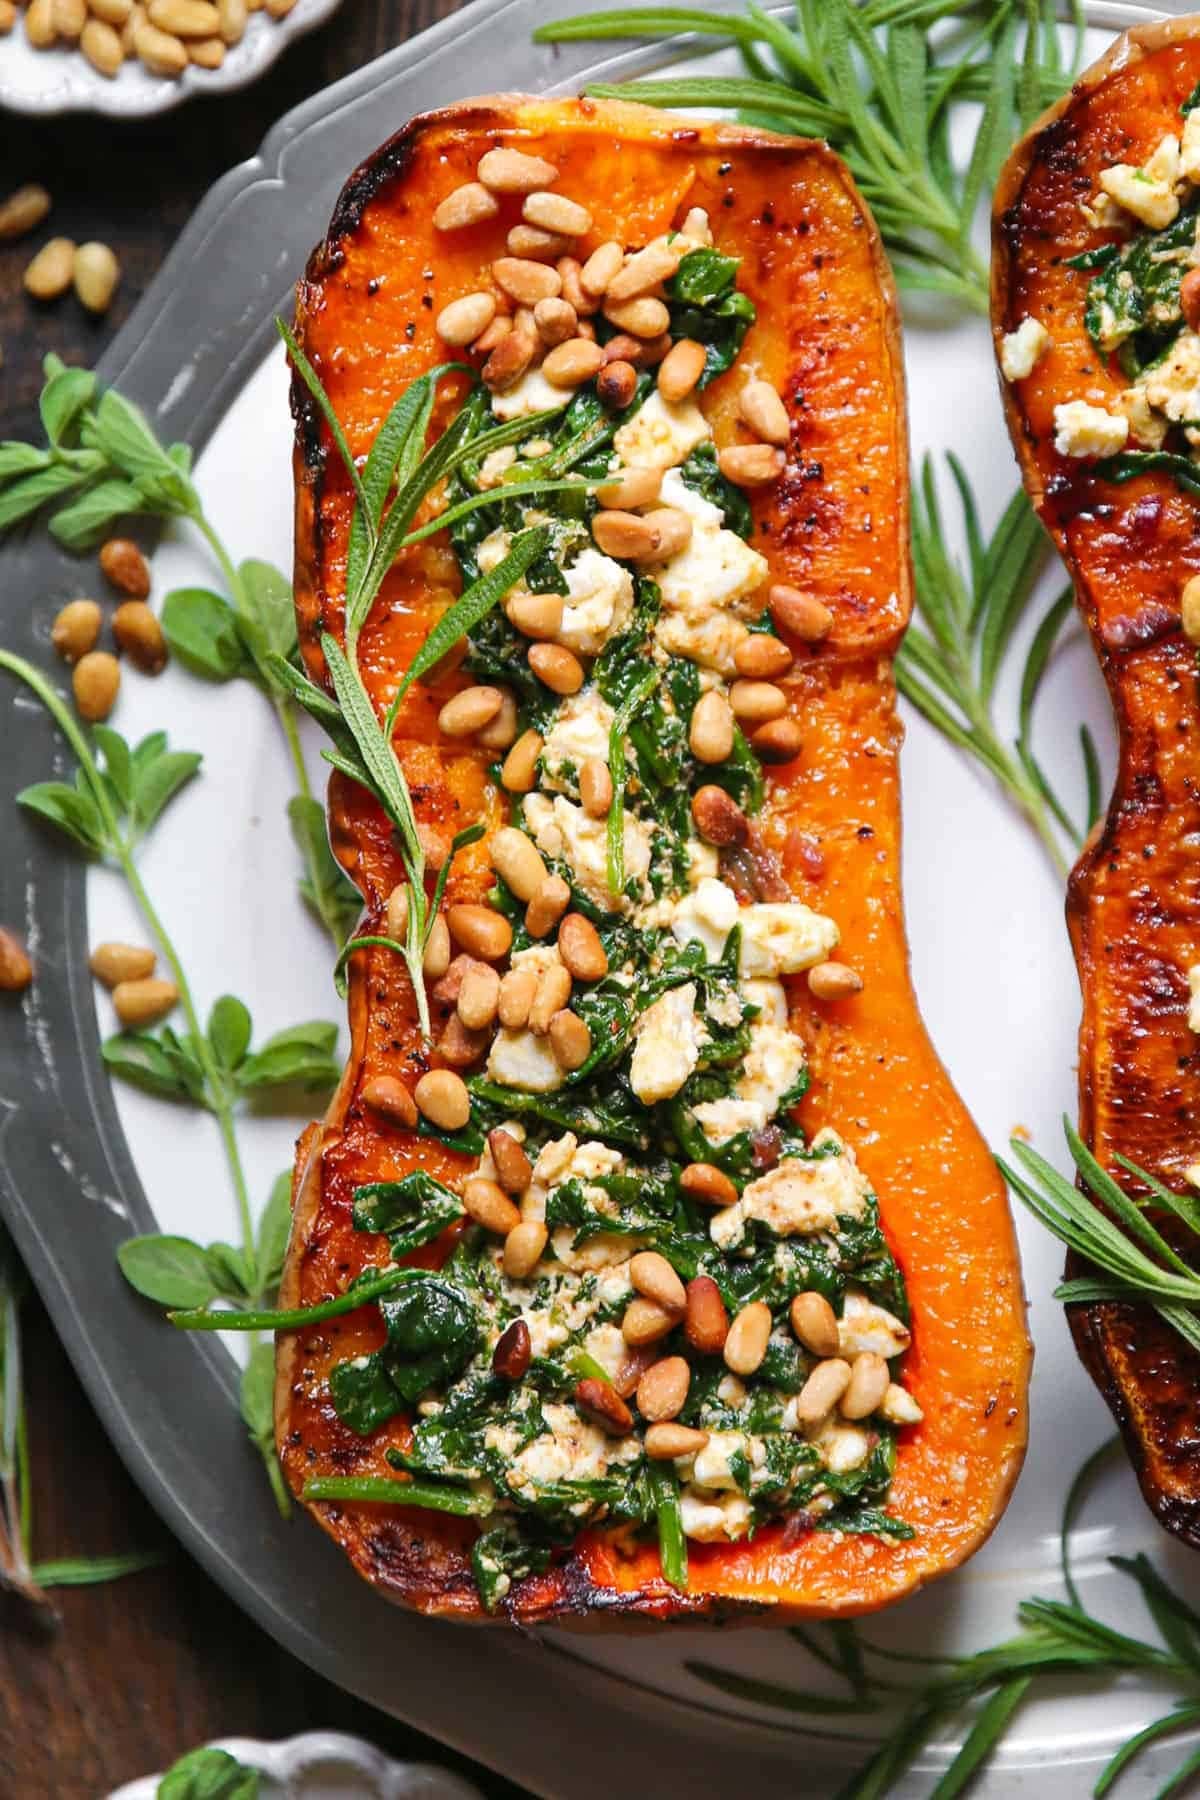 Roasted butternut squash stuffed with feta and spinach.